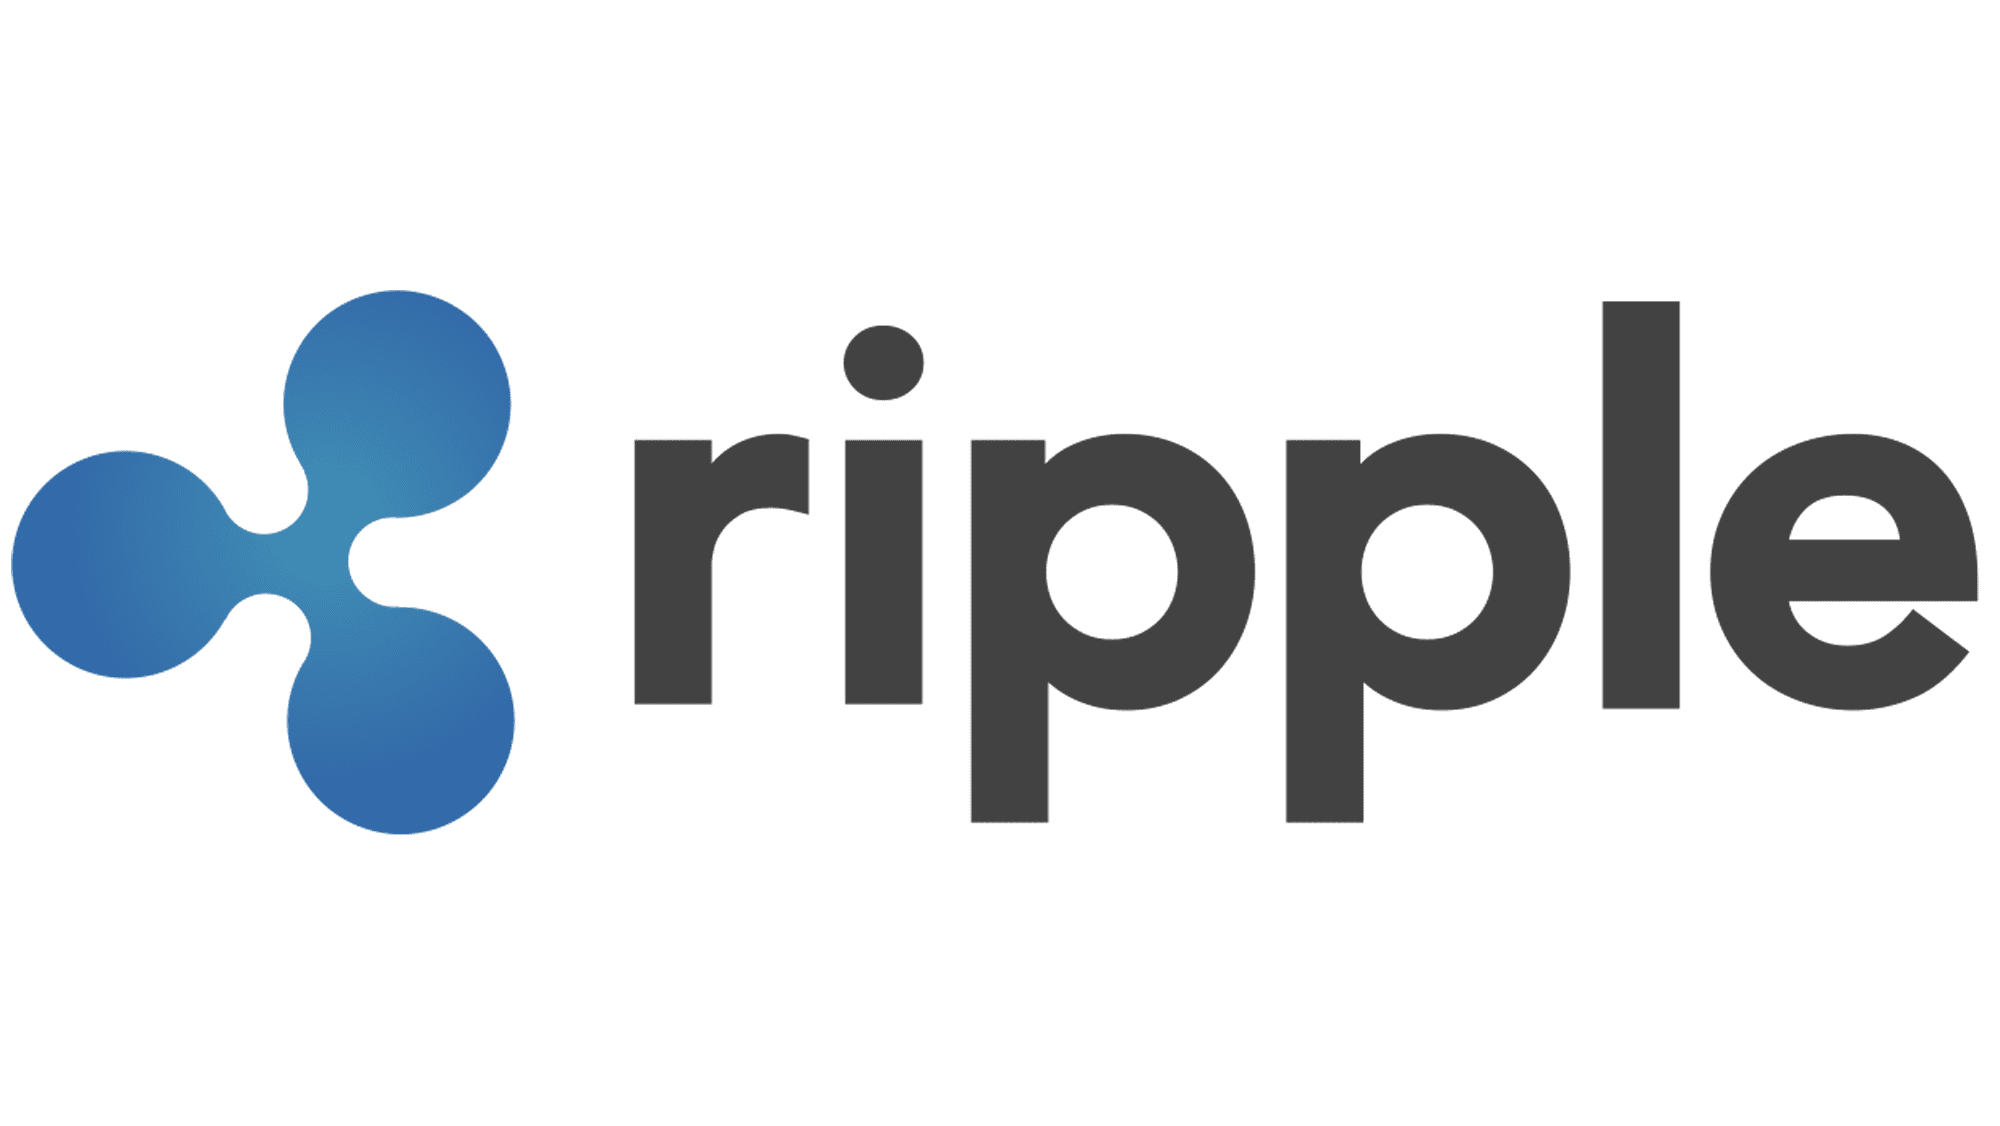 Ripple (XRP) has released around 400 million XRP tokens,